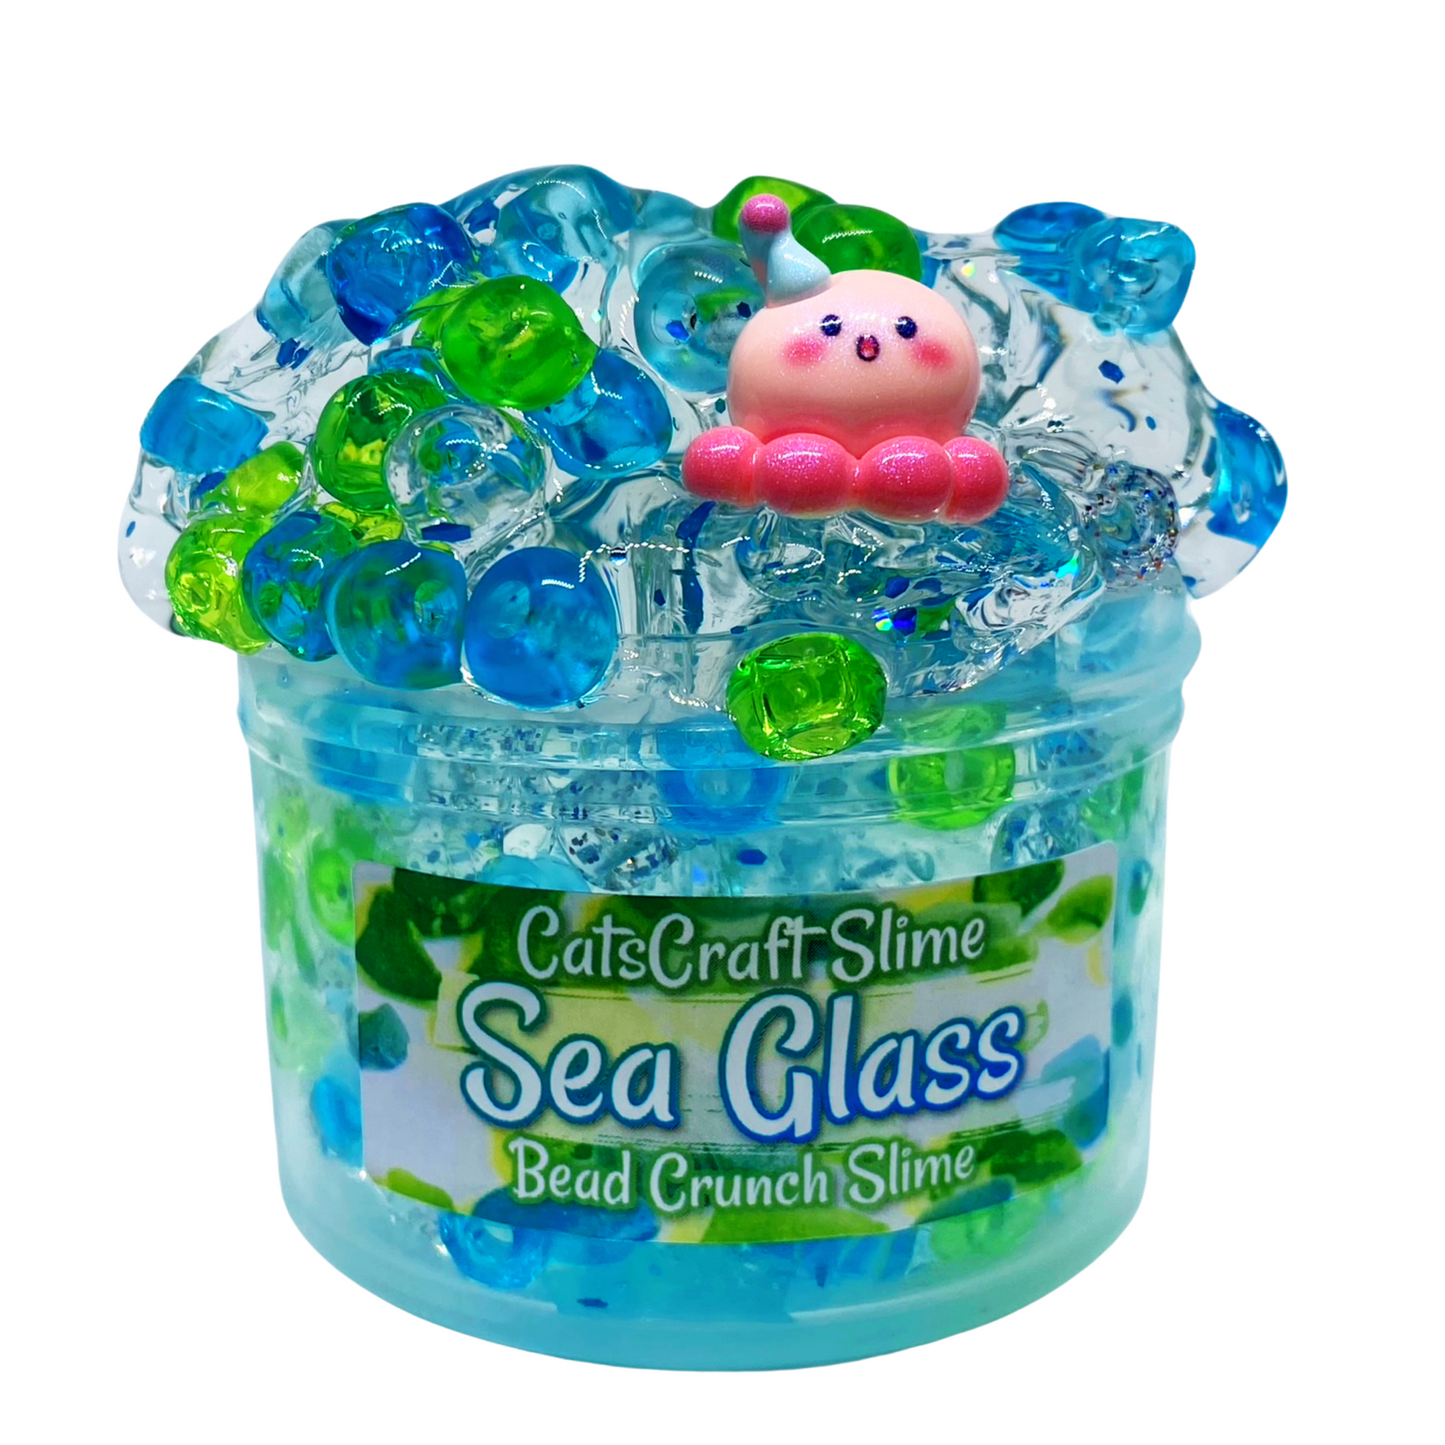 Bead Crunch Clear Slime "Sea Glass" Scented Stretchy Slime ASMR 6 oz